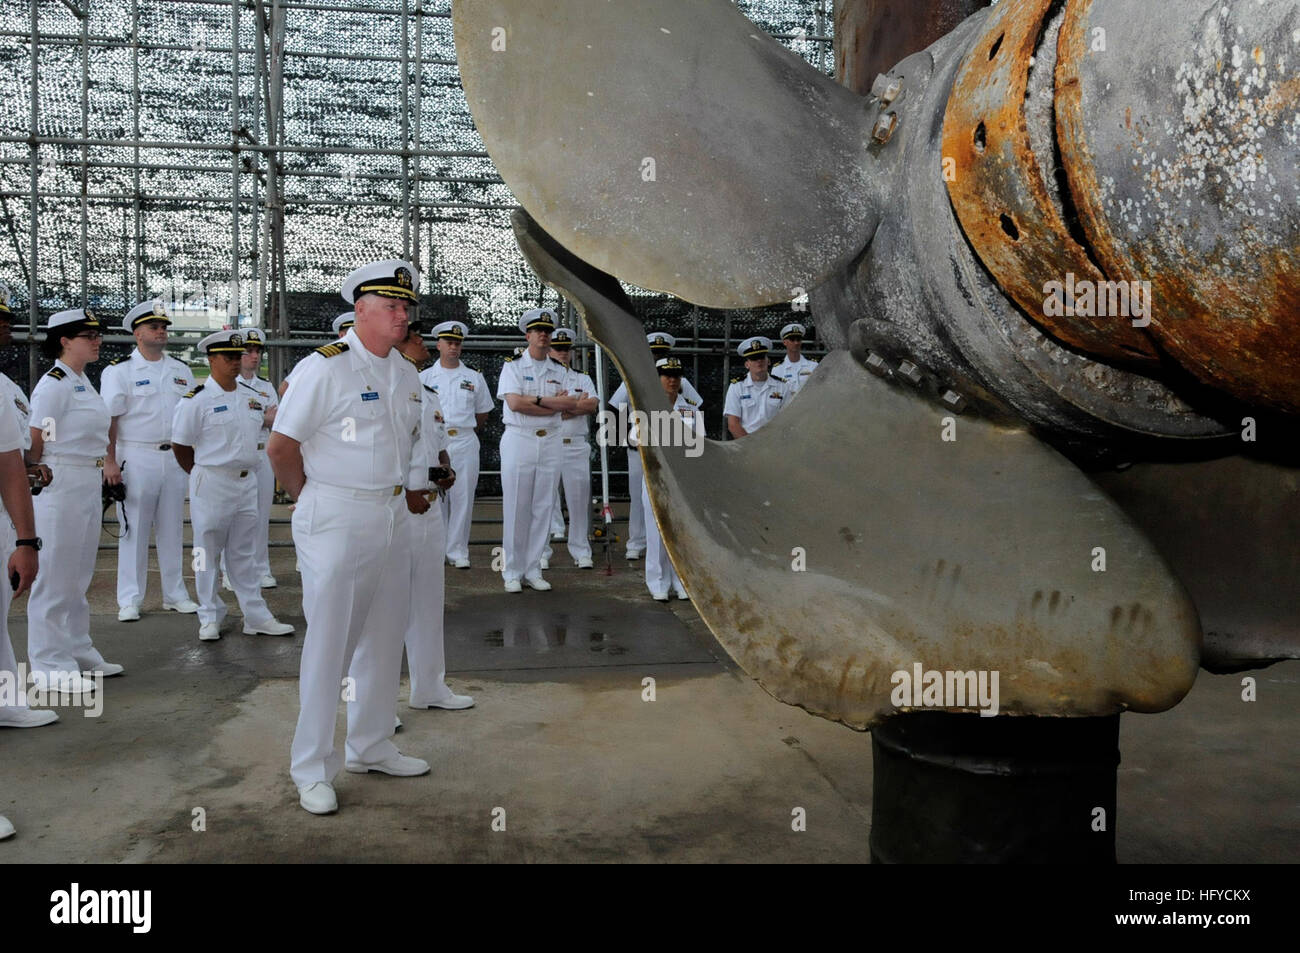 100826-N-7478G-235 PYEONGTAEK, Republic of Korea (Aug. 26, 2010) Capt. Rudy Lupton, commanding officer of the U.S. 7th Fleet command ship USS Blue Ridge, examines the bent propellor of Republic of Korea (ROK) corvette (ROKS) Cheonan (PCC 772). A non-contact homing torpedo exploded near the ship Mar. 26, 2010, sinking it, resulting in the death of 46 ROK navy sailors. Blue Ridge serves under Commander, Expeditionary Strike Group (ESG) 7/Task Force (CTF) 76, the Navy's only forward deployed amphibious force. (U.S. Navy photo by Mass Communication Specialist 2nd Class Cynthia Griggs/Released) US  Stock Photo